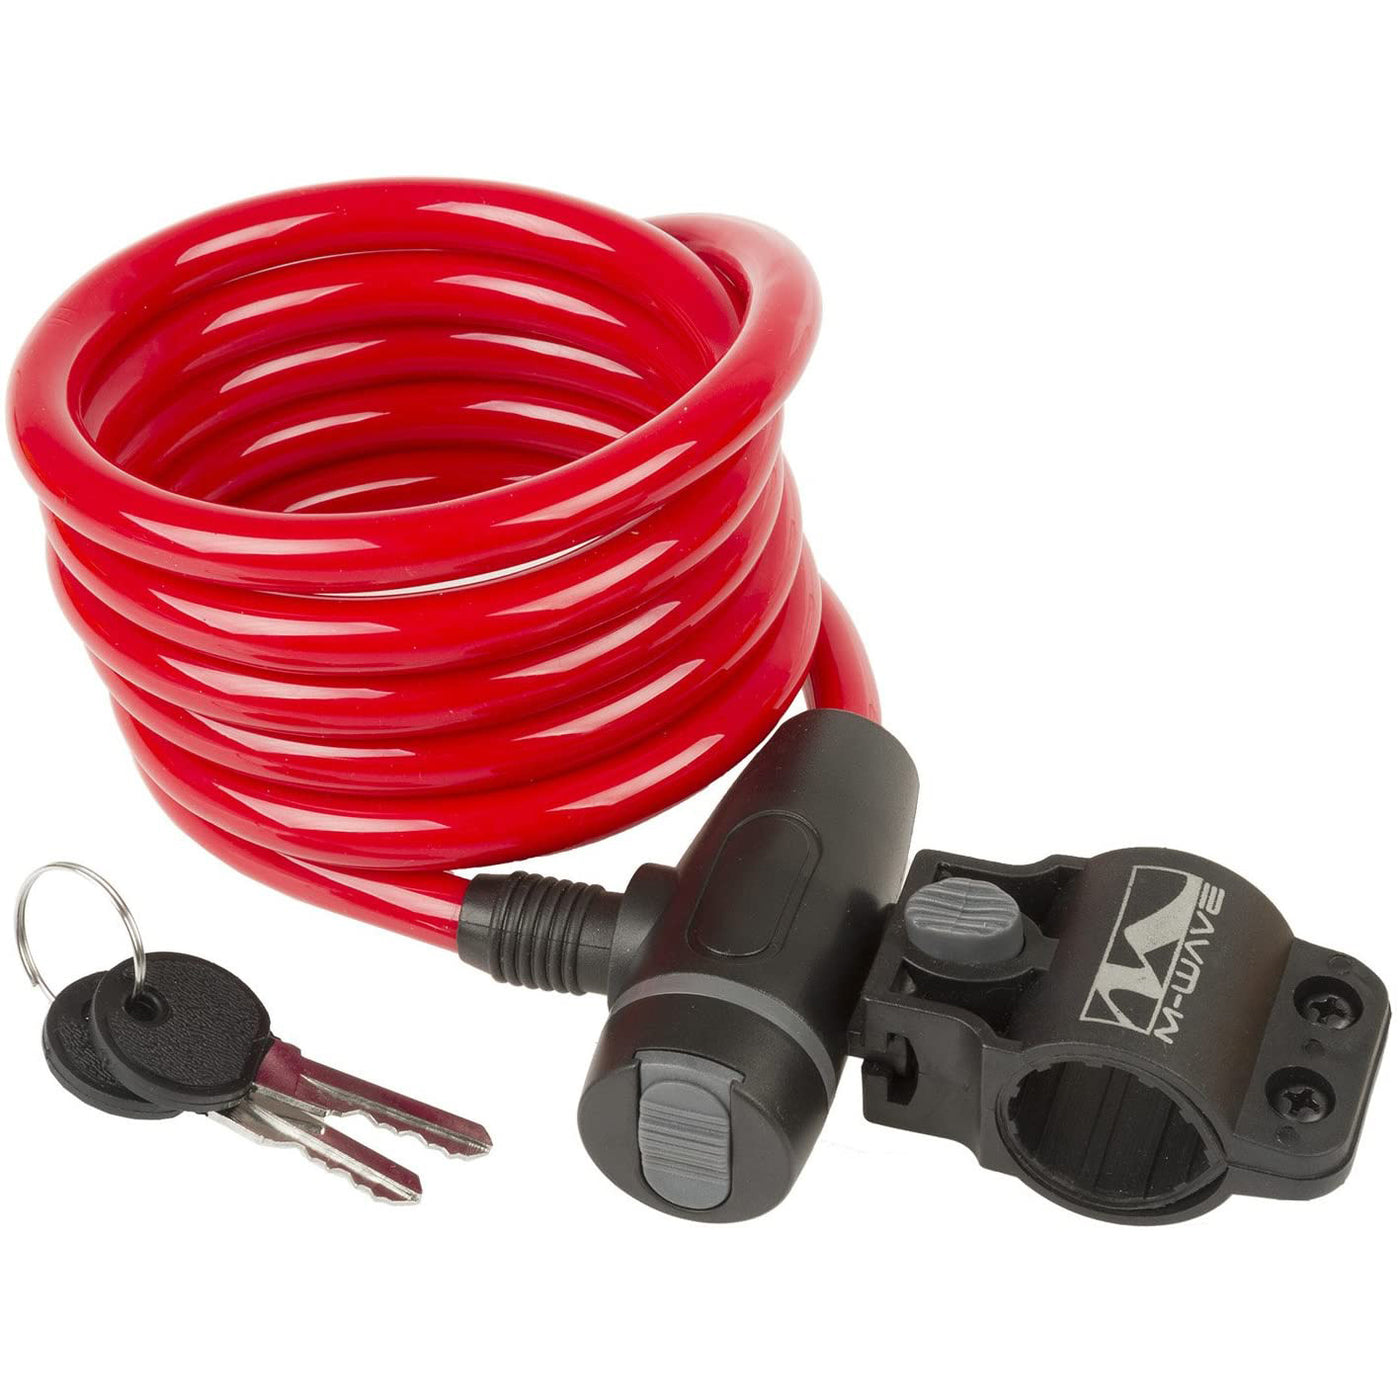 M-Wave 10x18 Spiral Cable Combination Lock with Card - Red - Cyclop.in